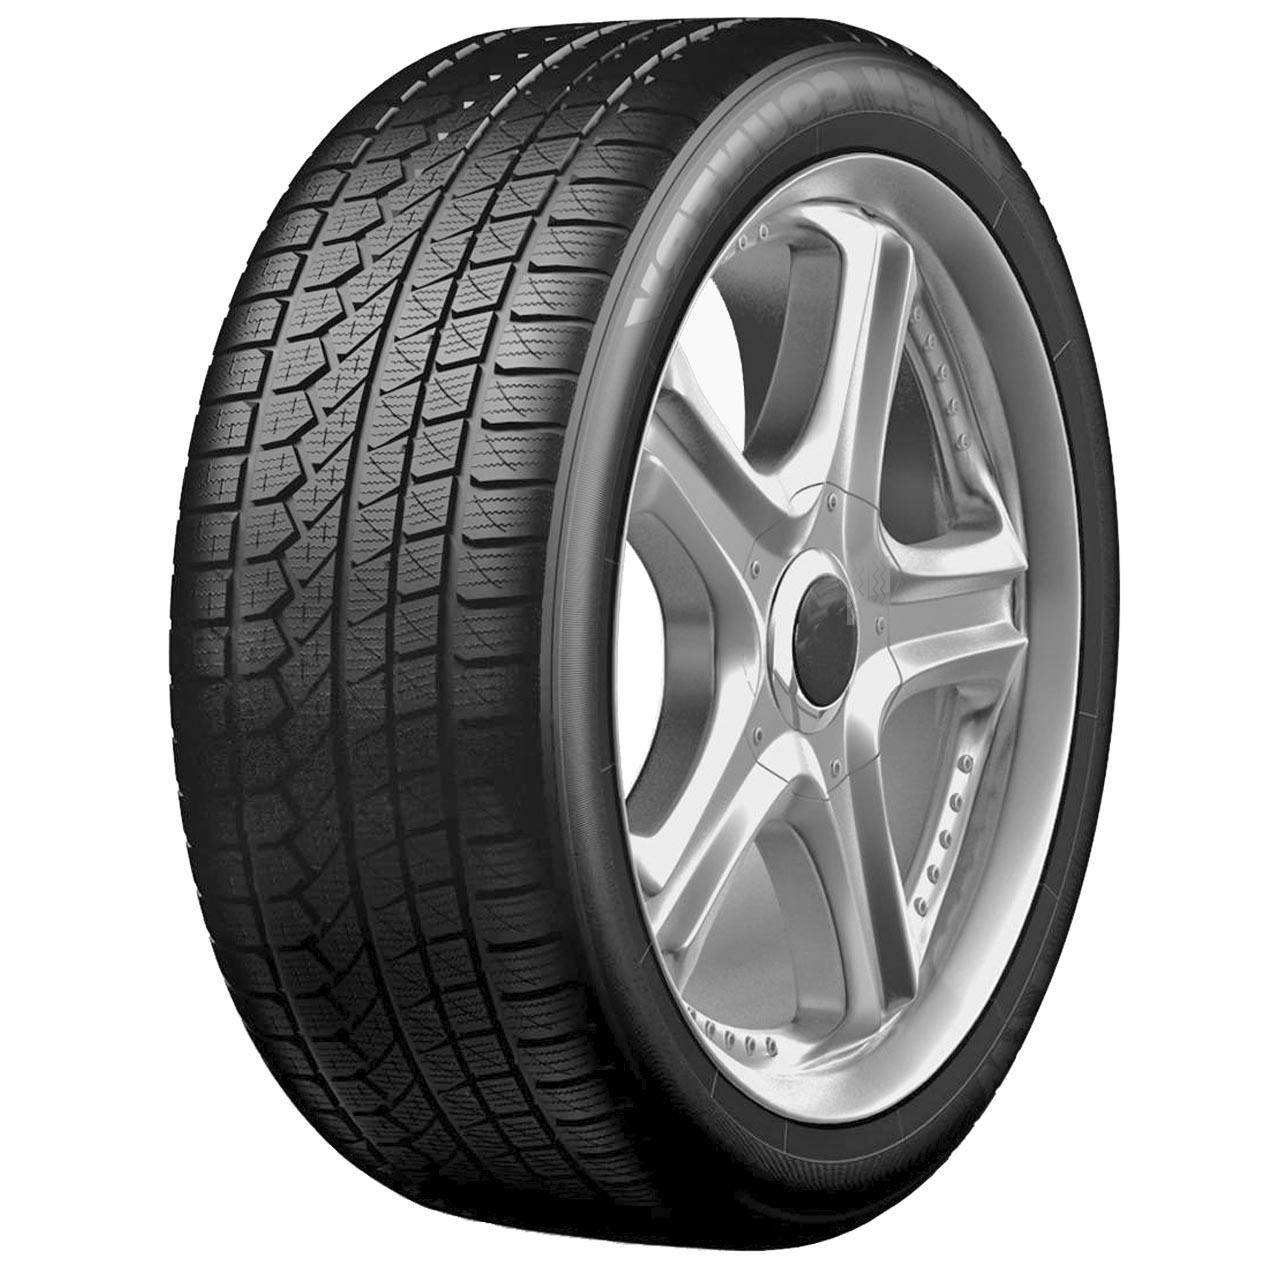 Toyo 245/65R17 111H XL Open Country W/T TL